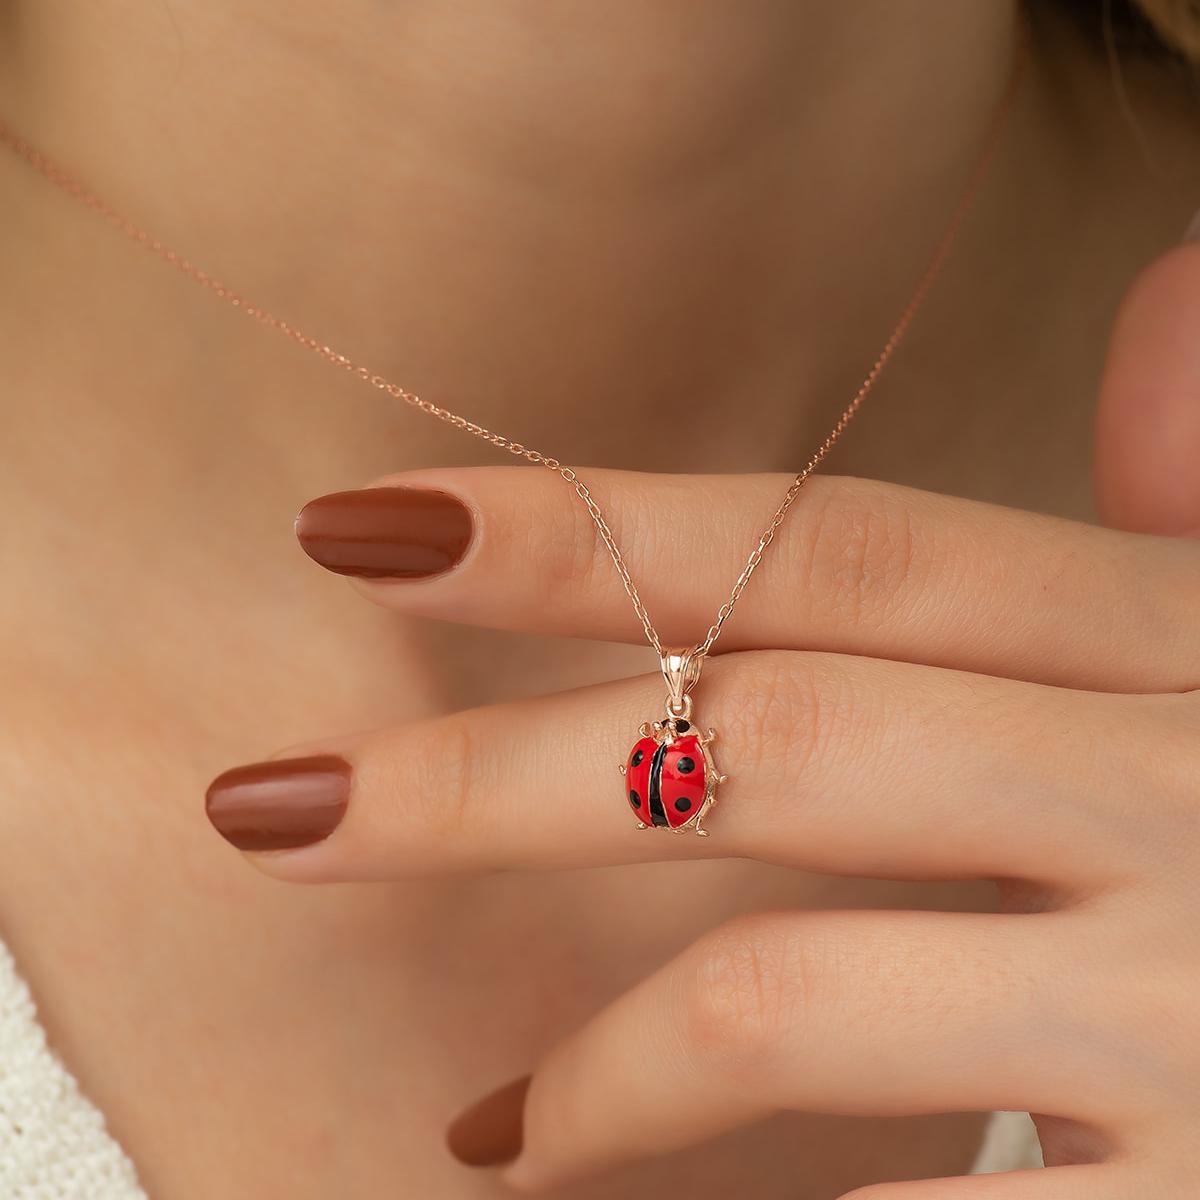 Ladybug Pendant Necklace • Ladybug Necklace Silver • Gift For Her - Trending Silver Gifts